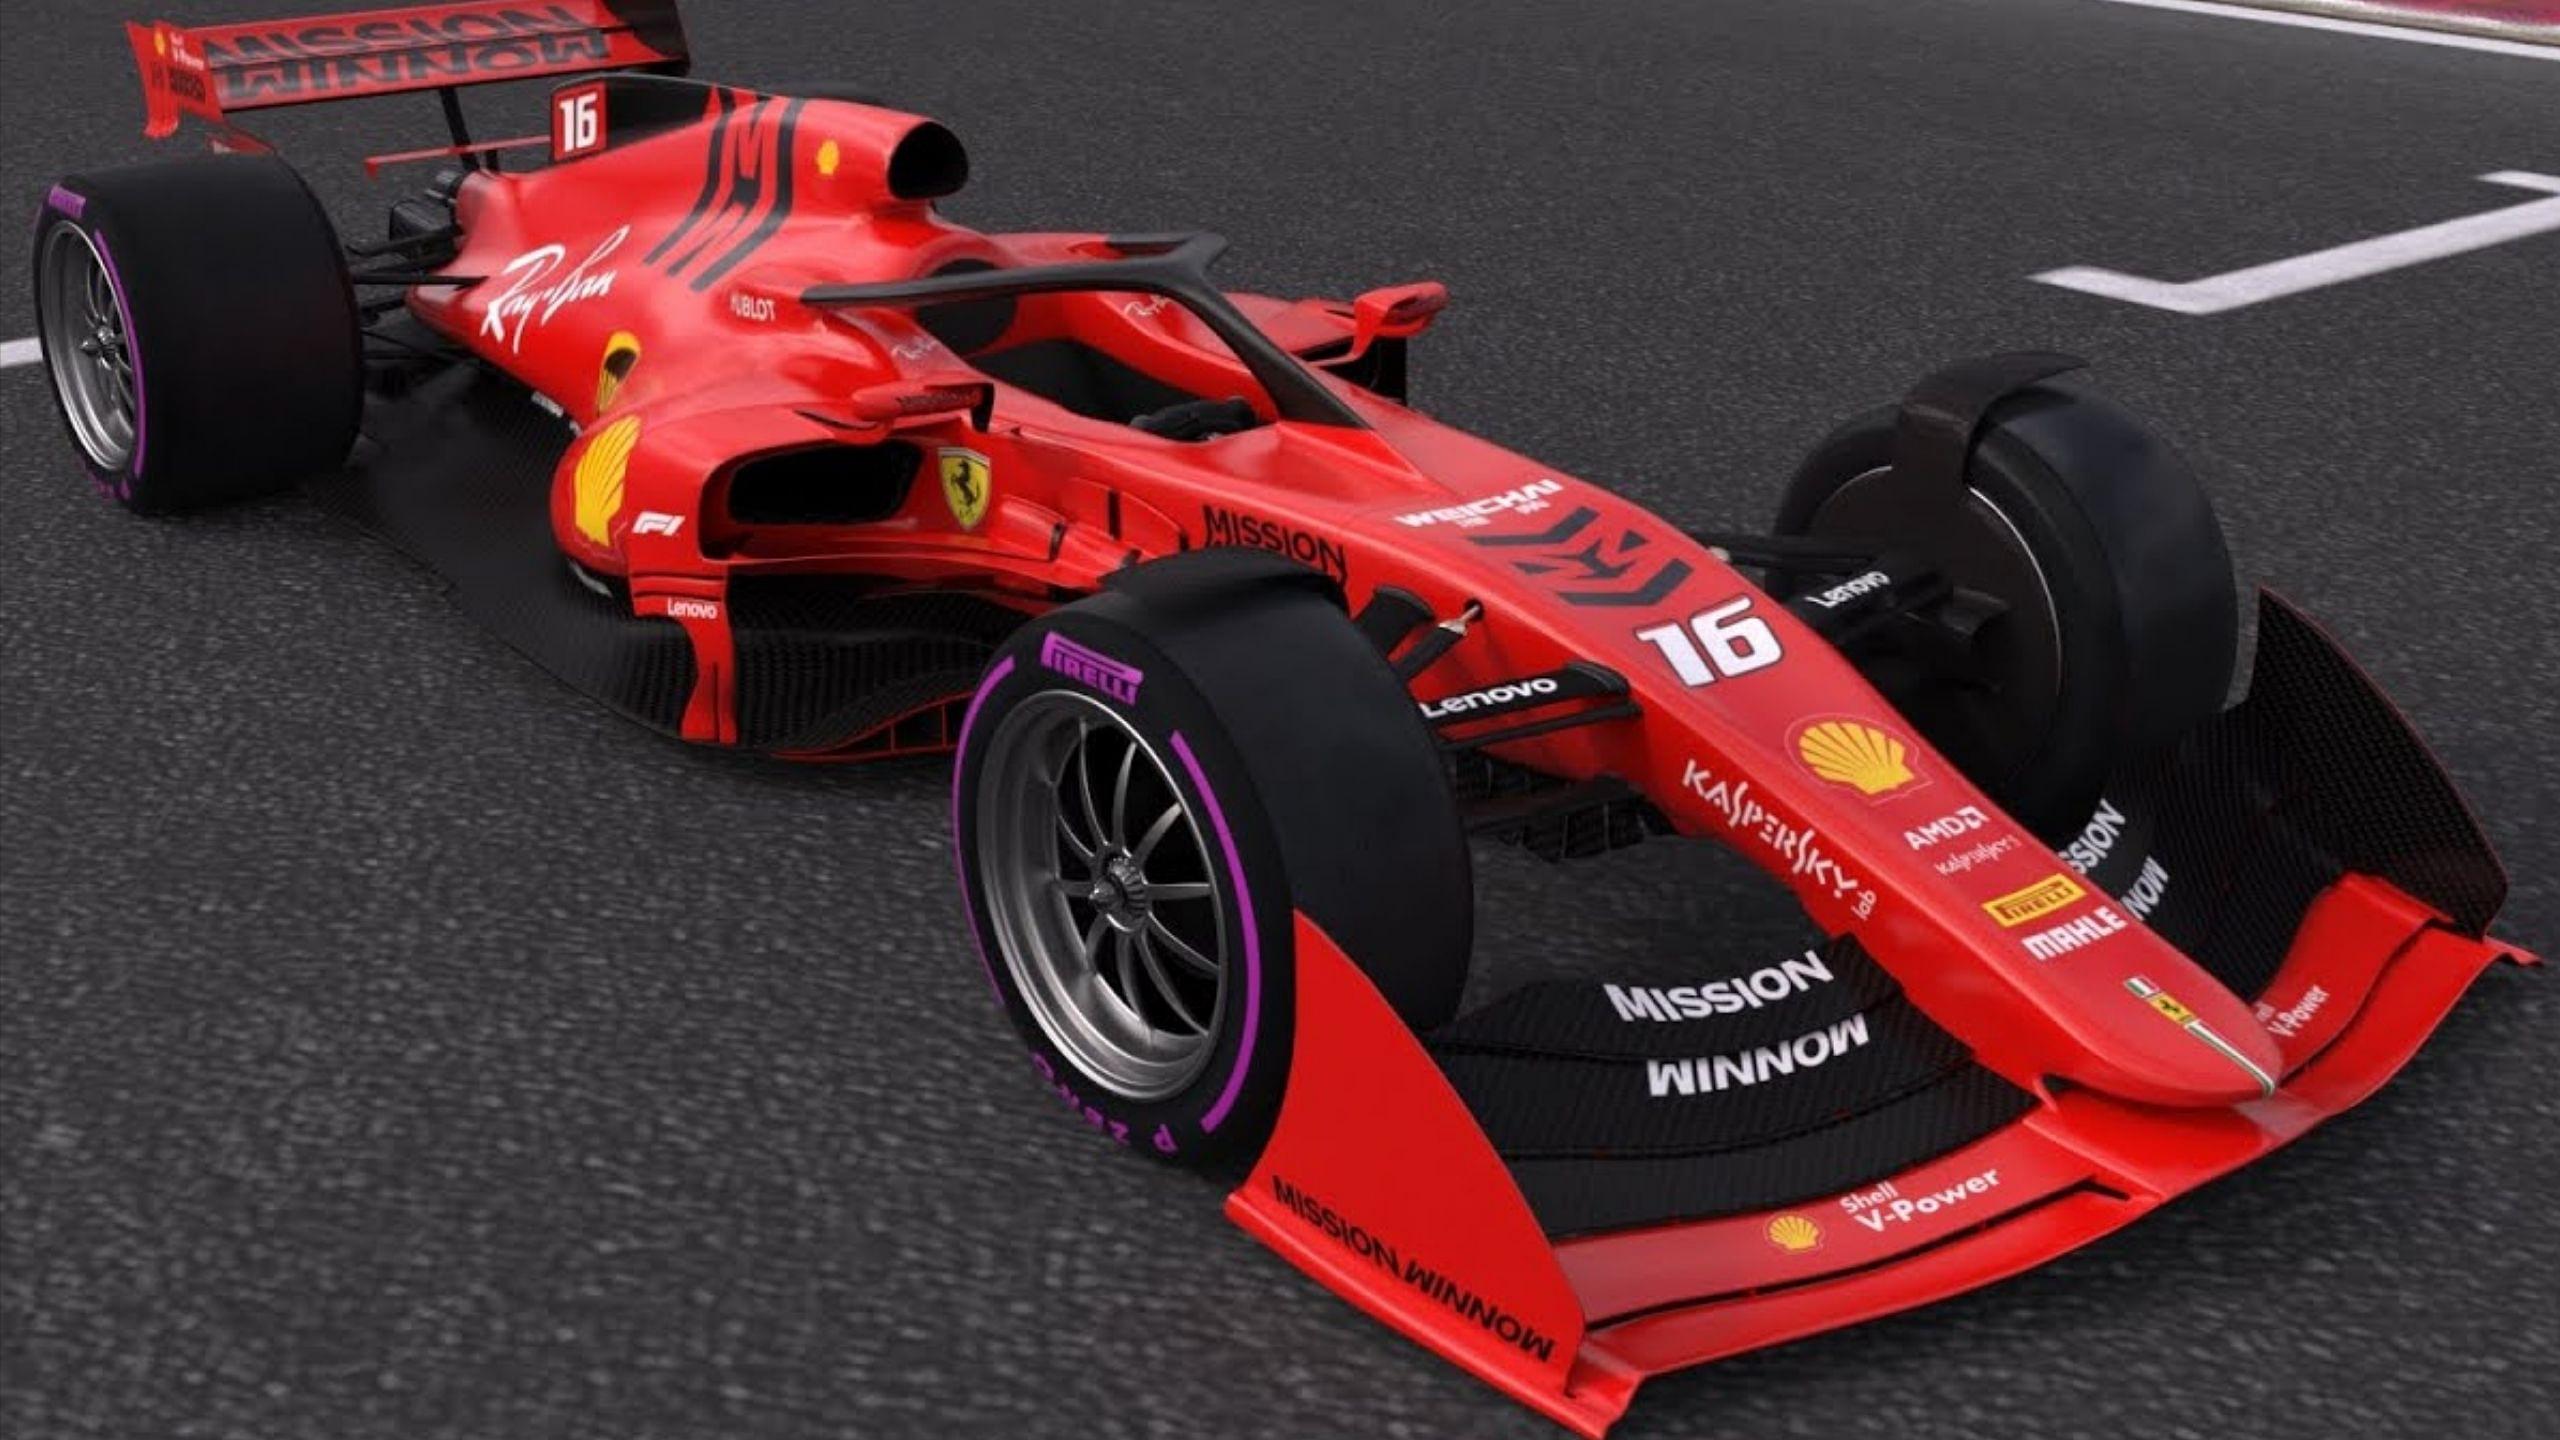 “I don’t think you can compare the situations” - Mattia Binotto refuses to suggest Ferrari dominance in 2022 like Mercedes in 2014